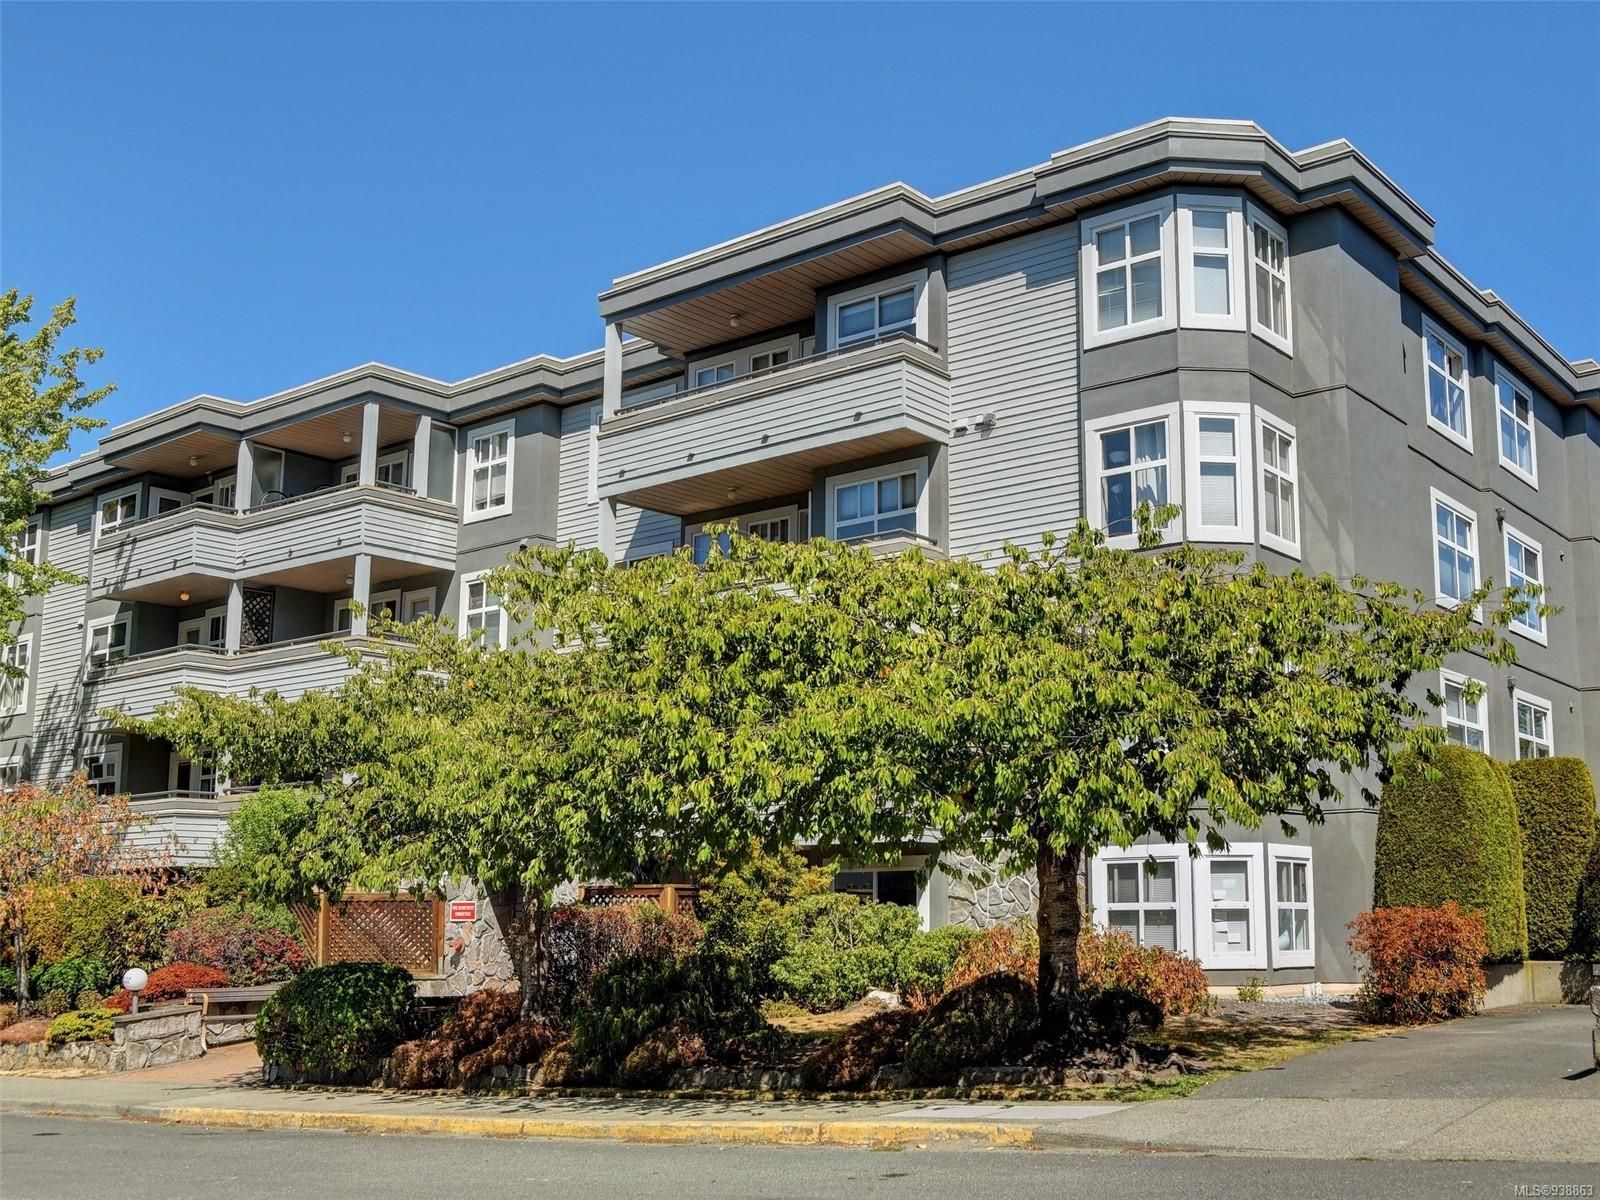 We have sold a property at 406 1580 Christmas Ave in Saanich